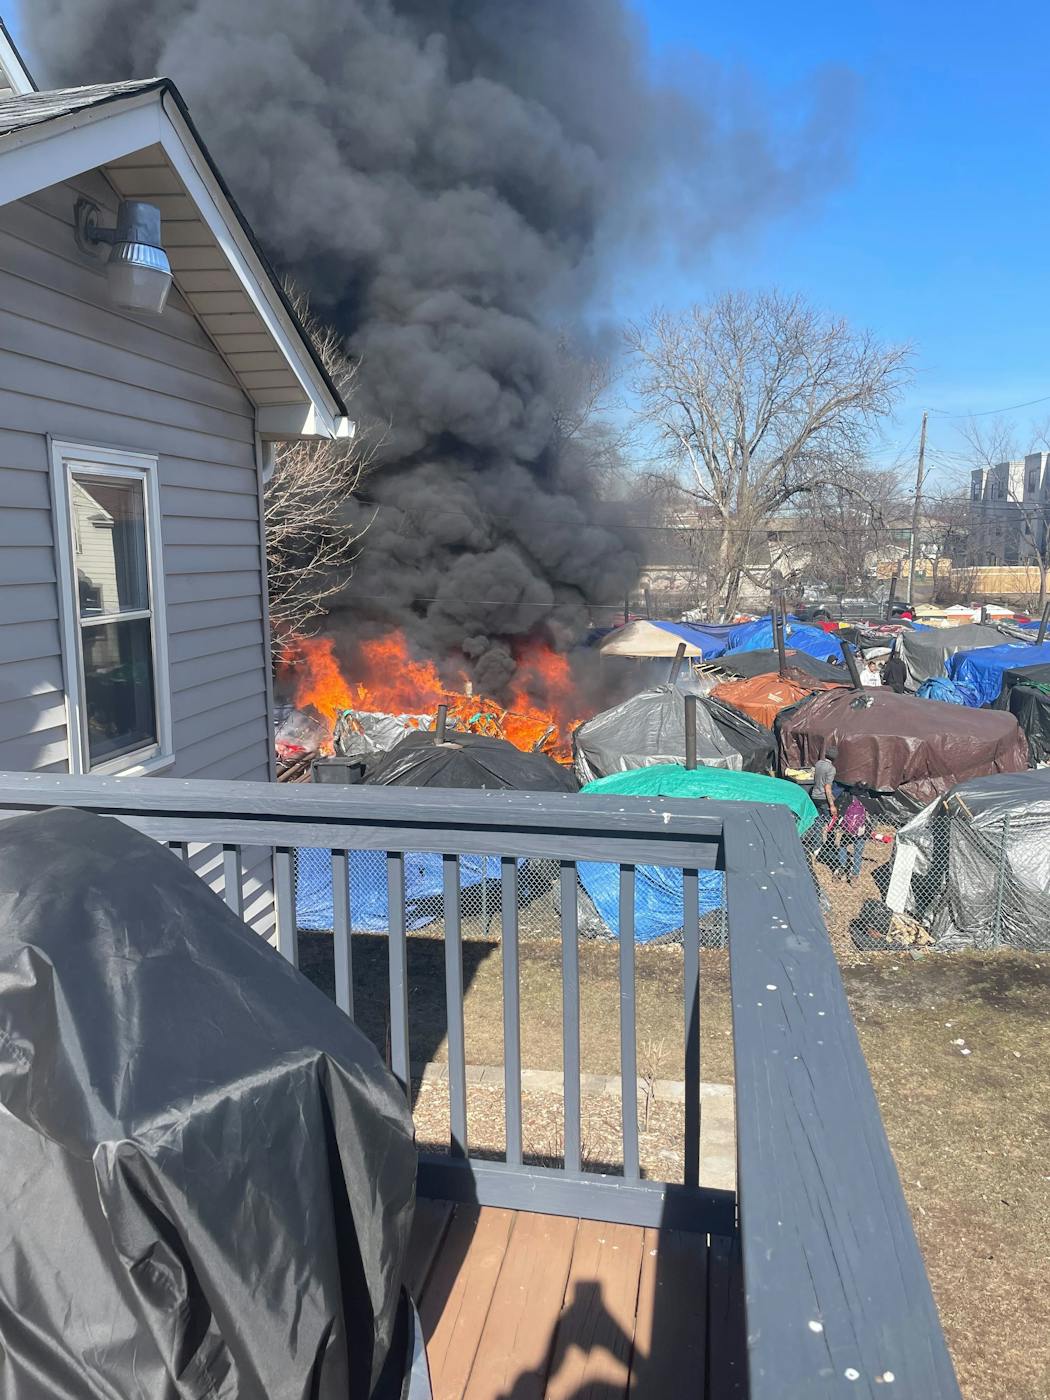 Large flames and smoke are visible from an encampment in the 1100 block of E. 28th Street, as seen from neighbor Ashley Jensen's home.